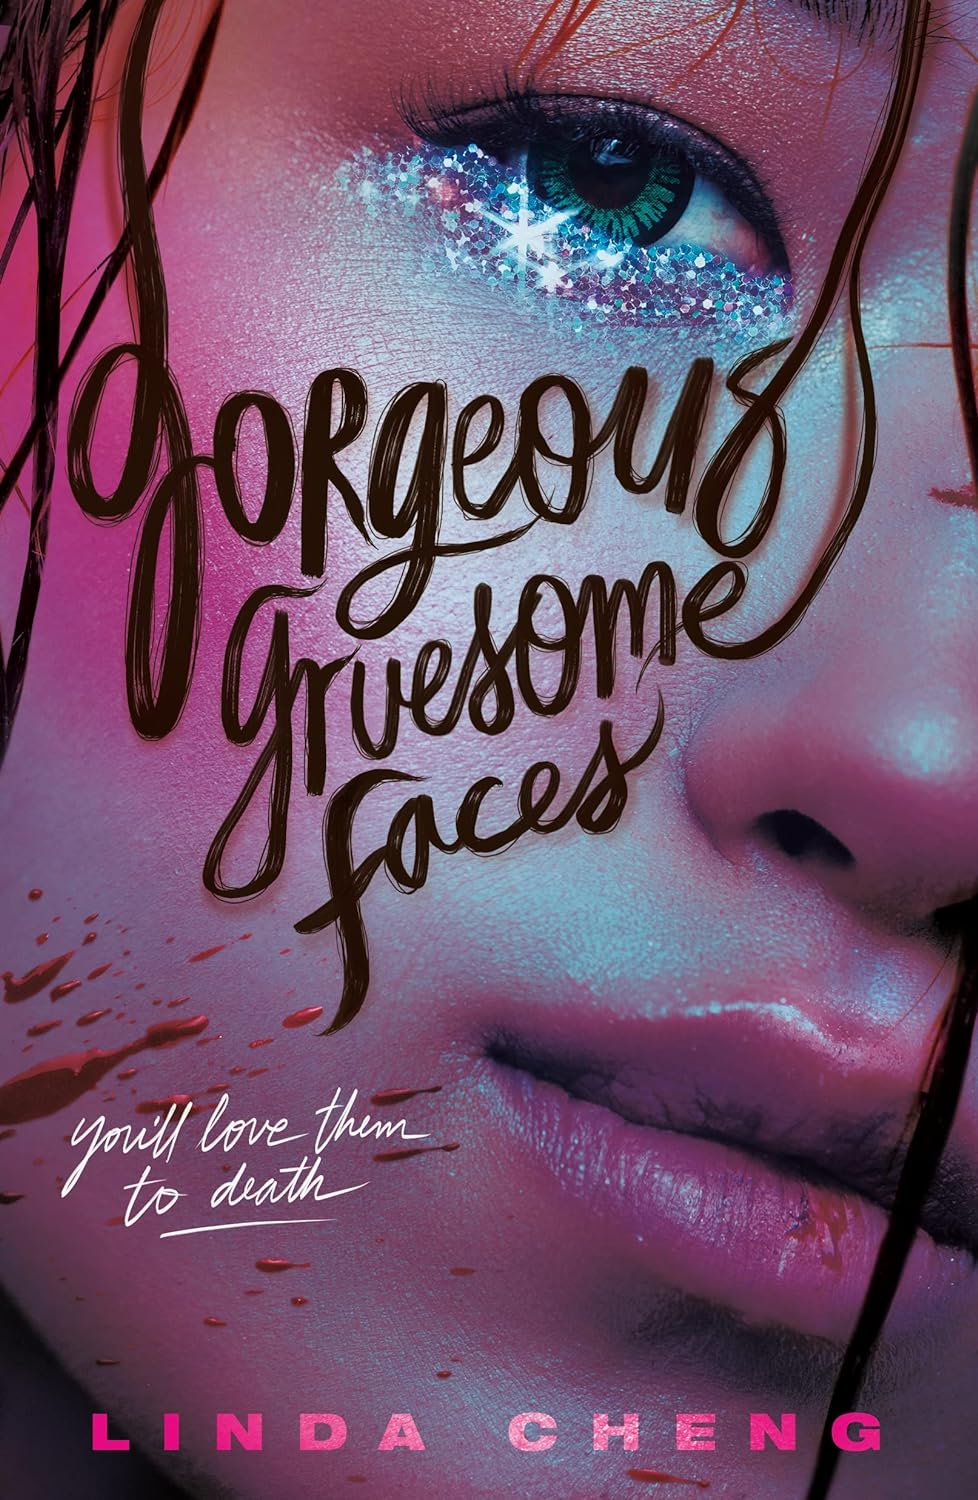 Gorgeous Gruesome Faces - by Linda Cheng (Hardcover)